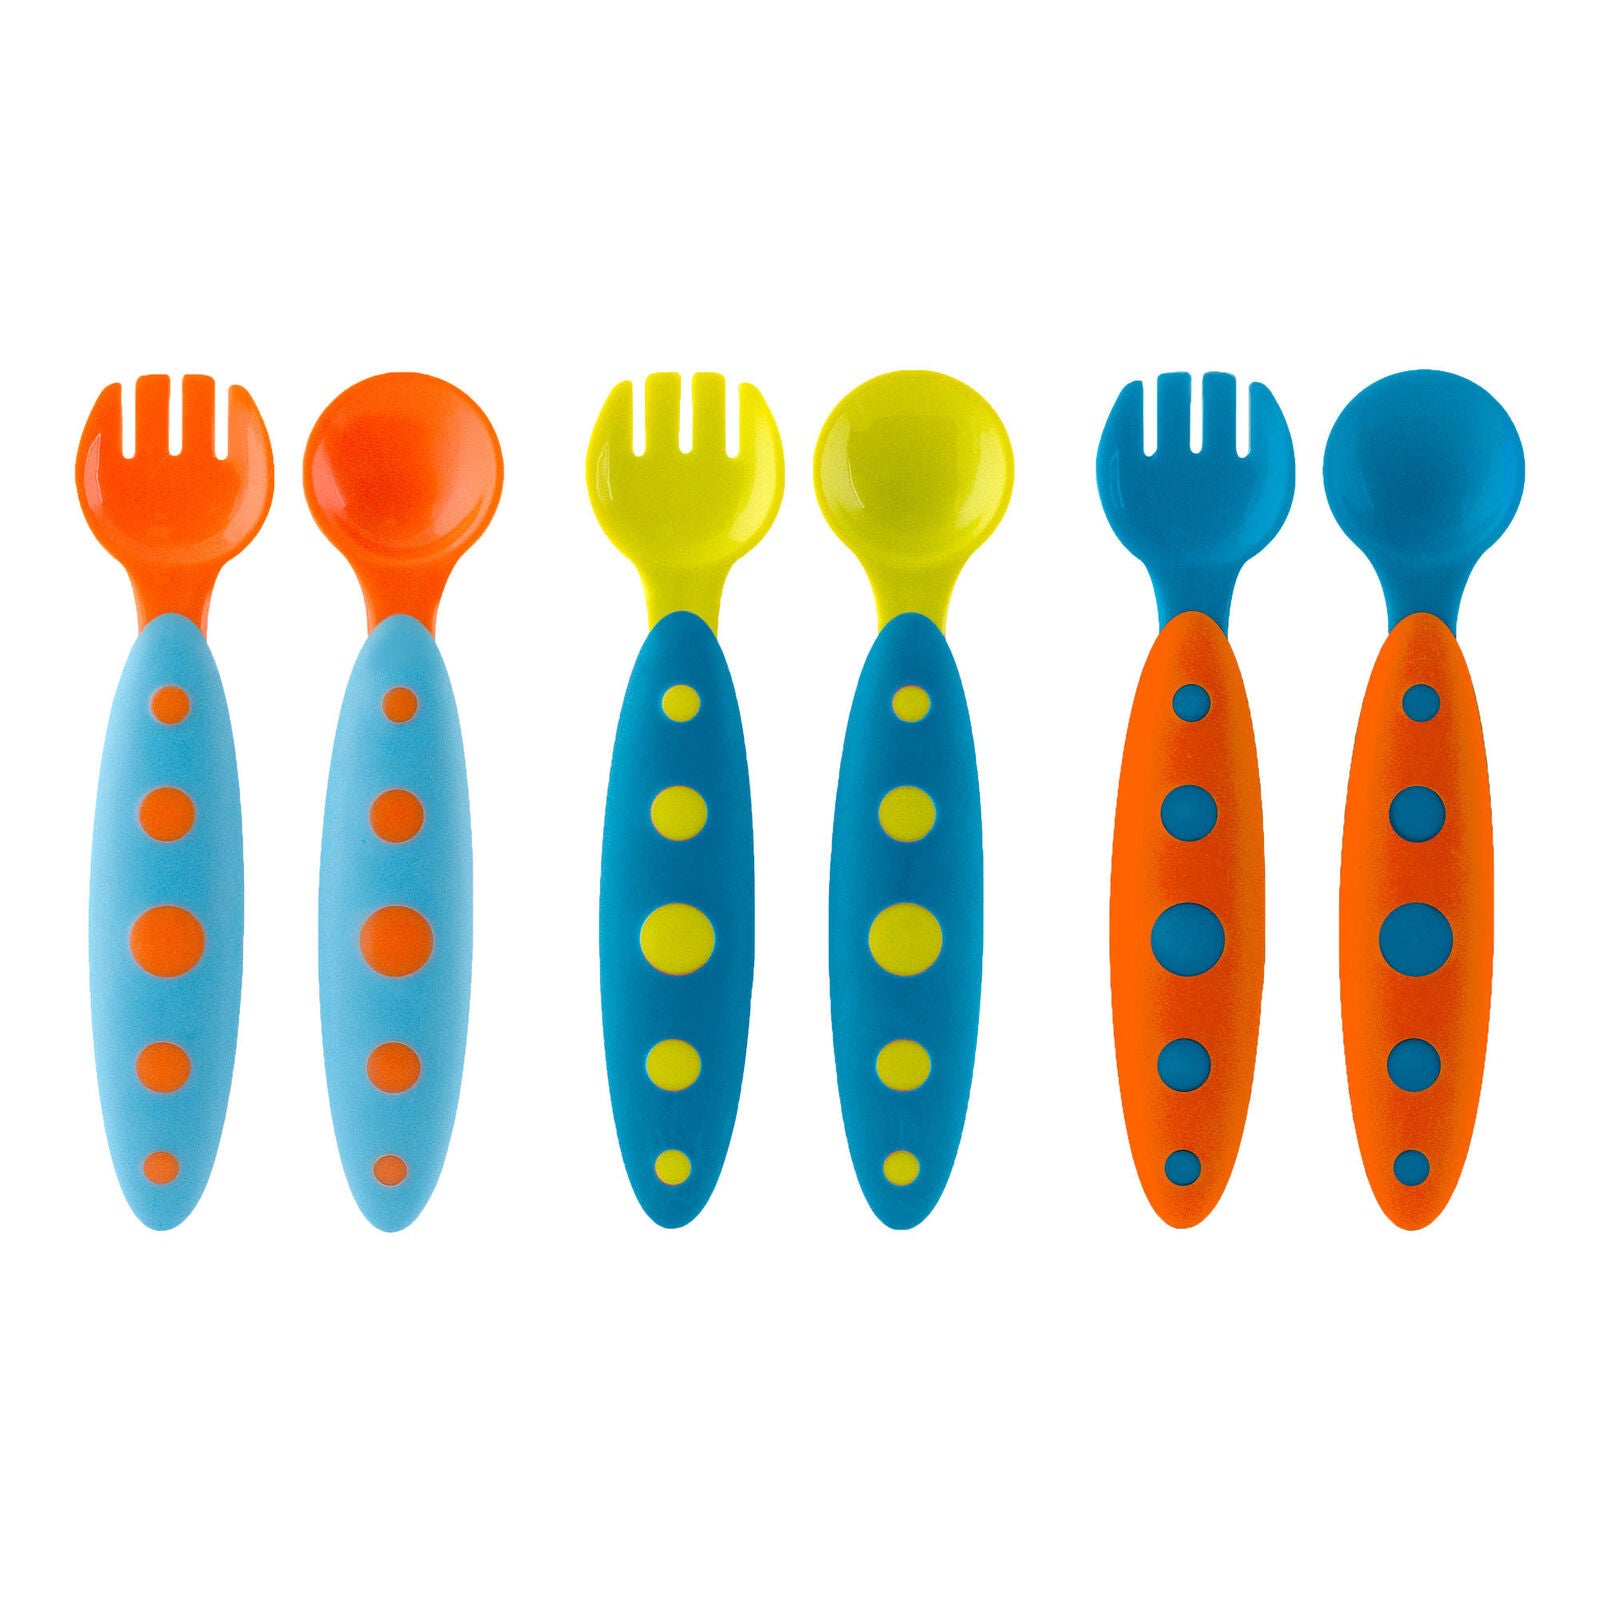 B10129 Boon MODWARE Cutlery Dishwasher Safe Multi Colour Baby Toddler 9+ Months